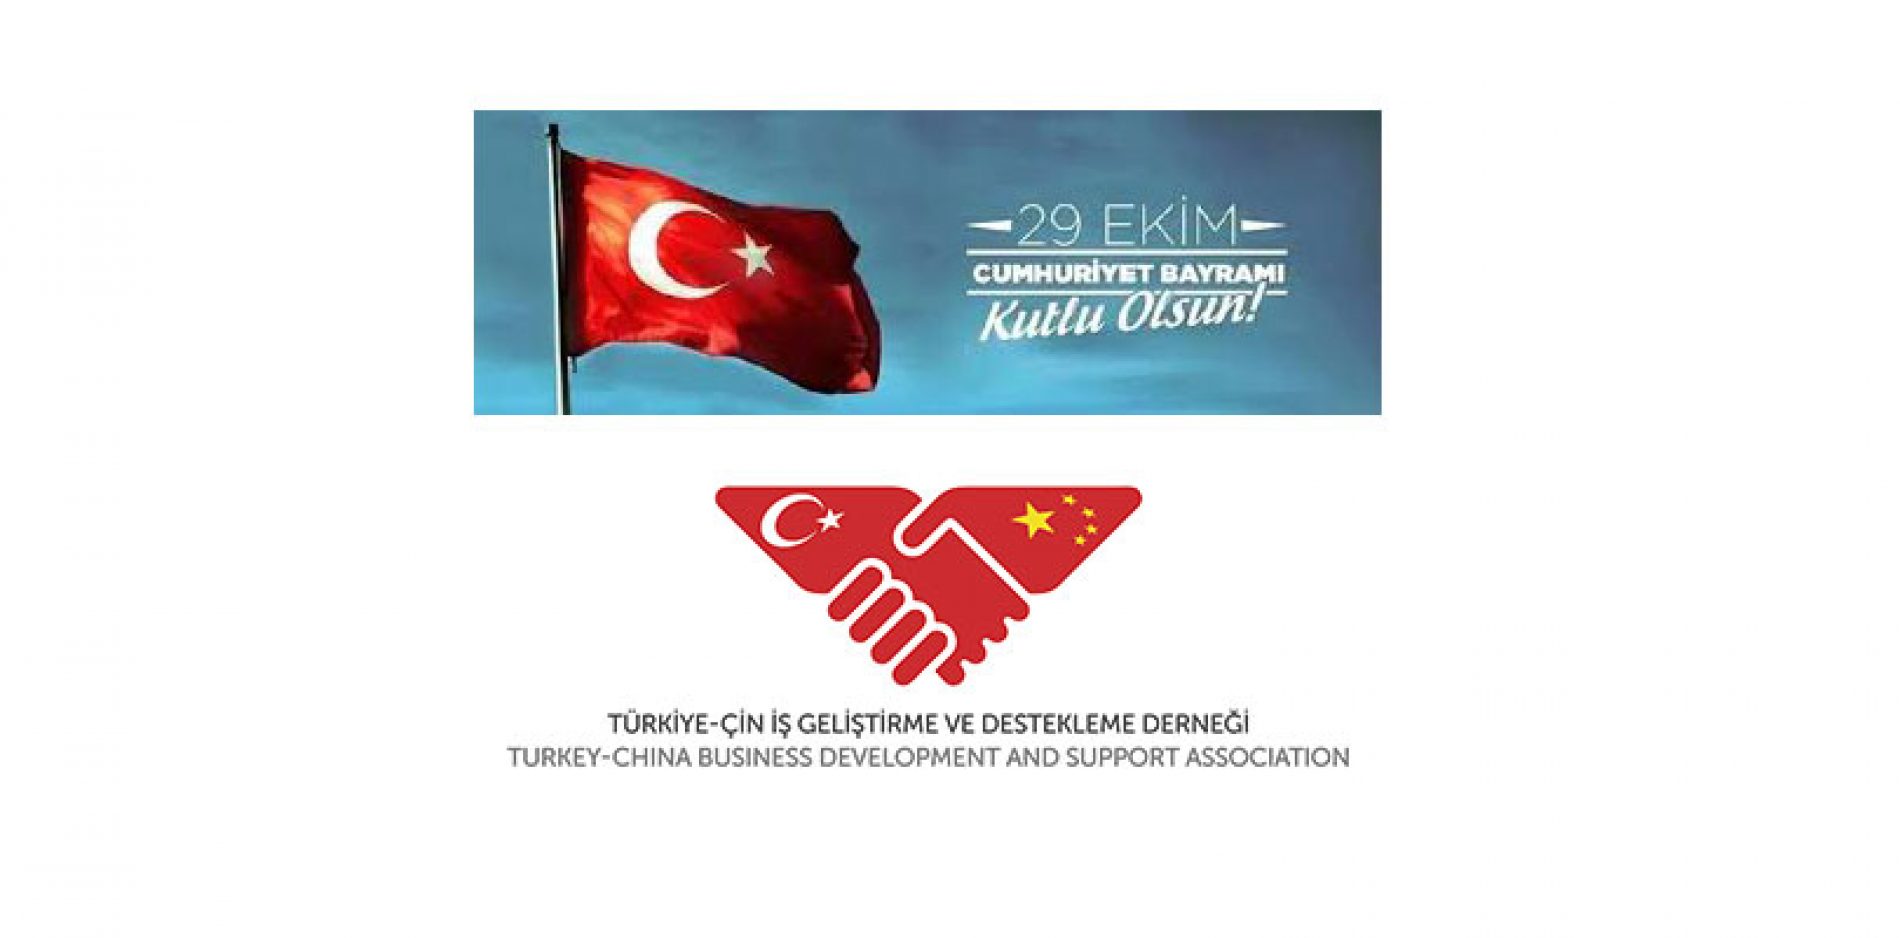 HAPPY REPUBLIC DAY OCTOBER 29 – Turkey China Business Development and Support Association Board